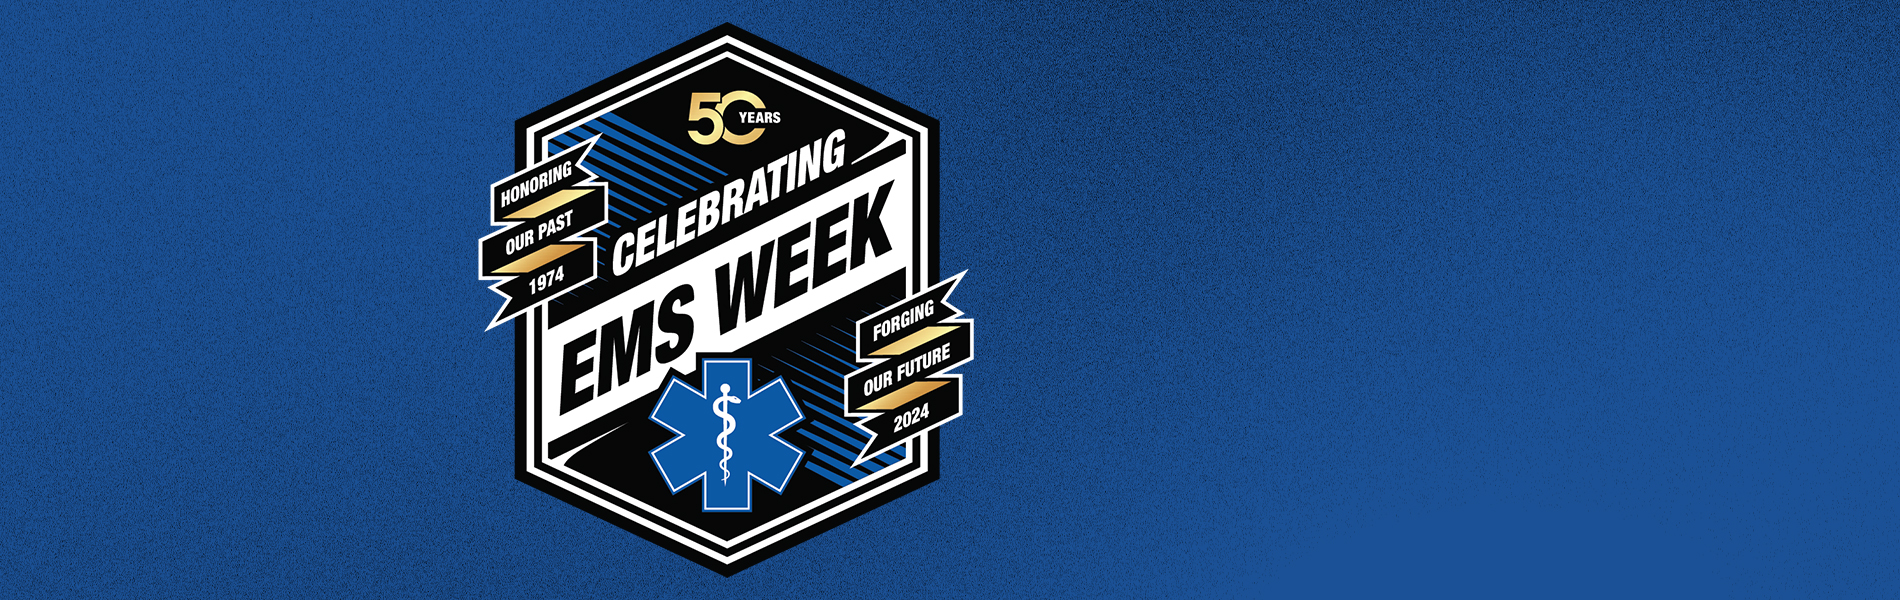 graphic image that says "celebrating EMS week: Honoring our past 1974, forging our future 2024